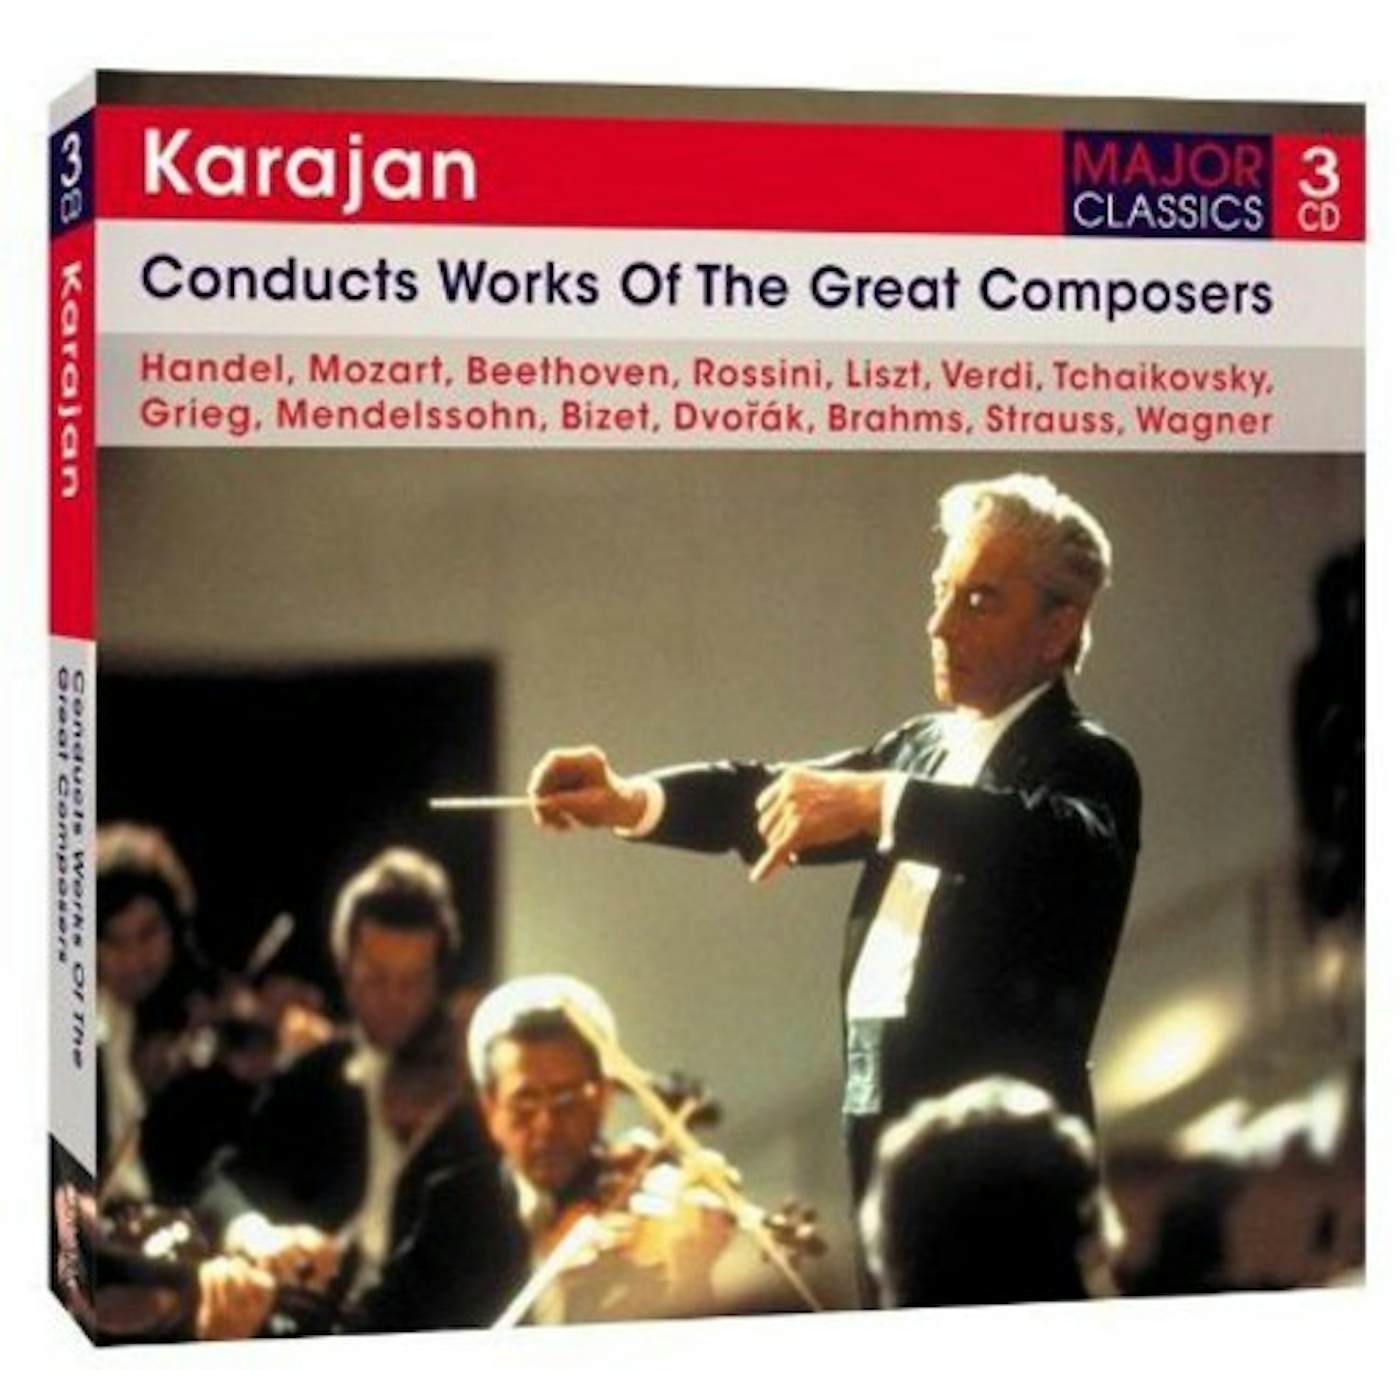 Herbert von Karajan CONDUCTS WORKS OF THE GREAT COMPOSERS CD